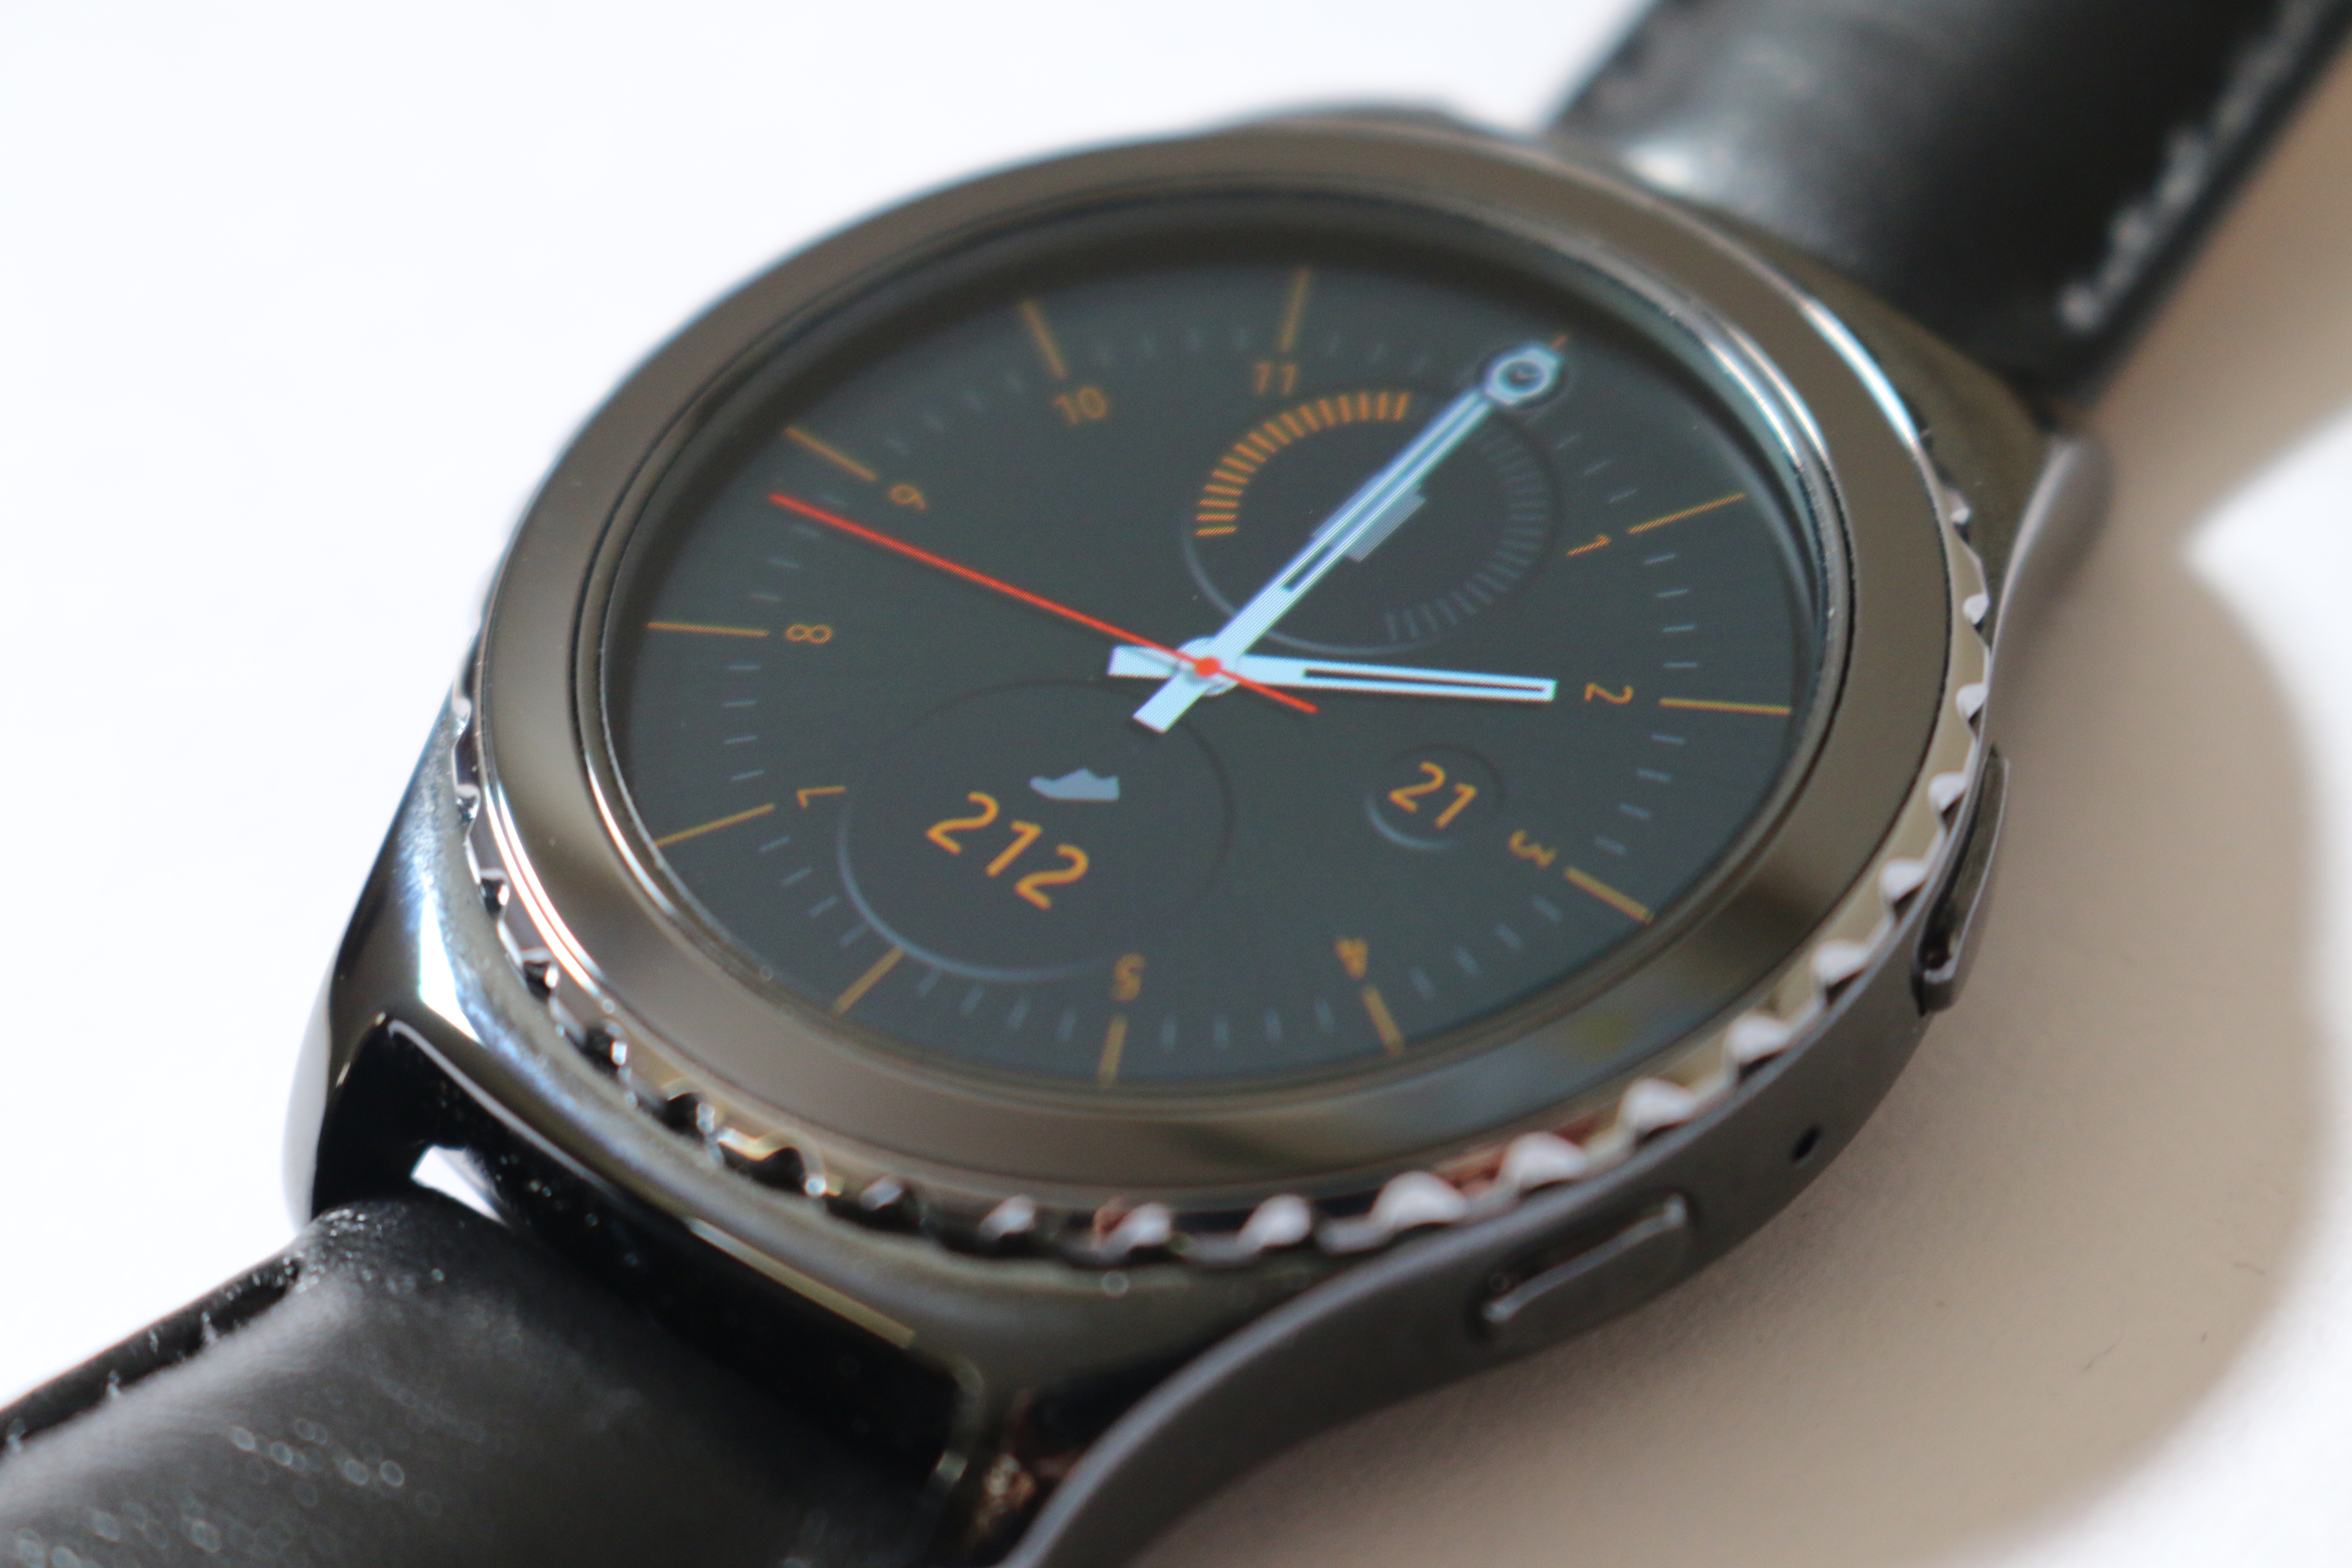 Samsung Gear S2 Review Pros Cons Is It Worth The Price Gadgets To Use